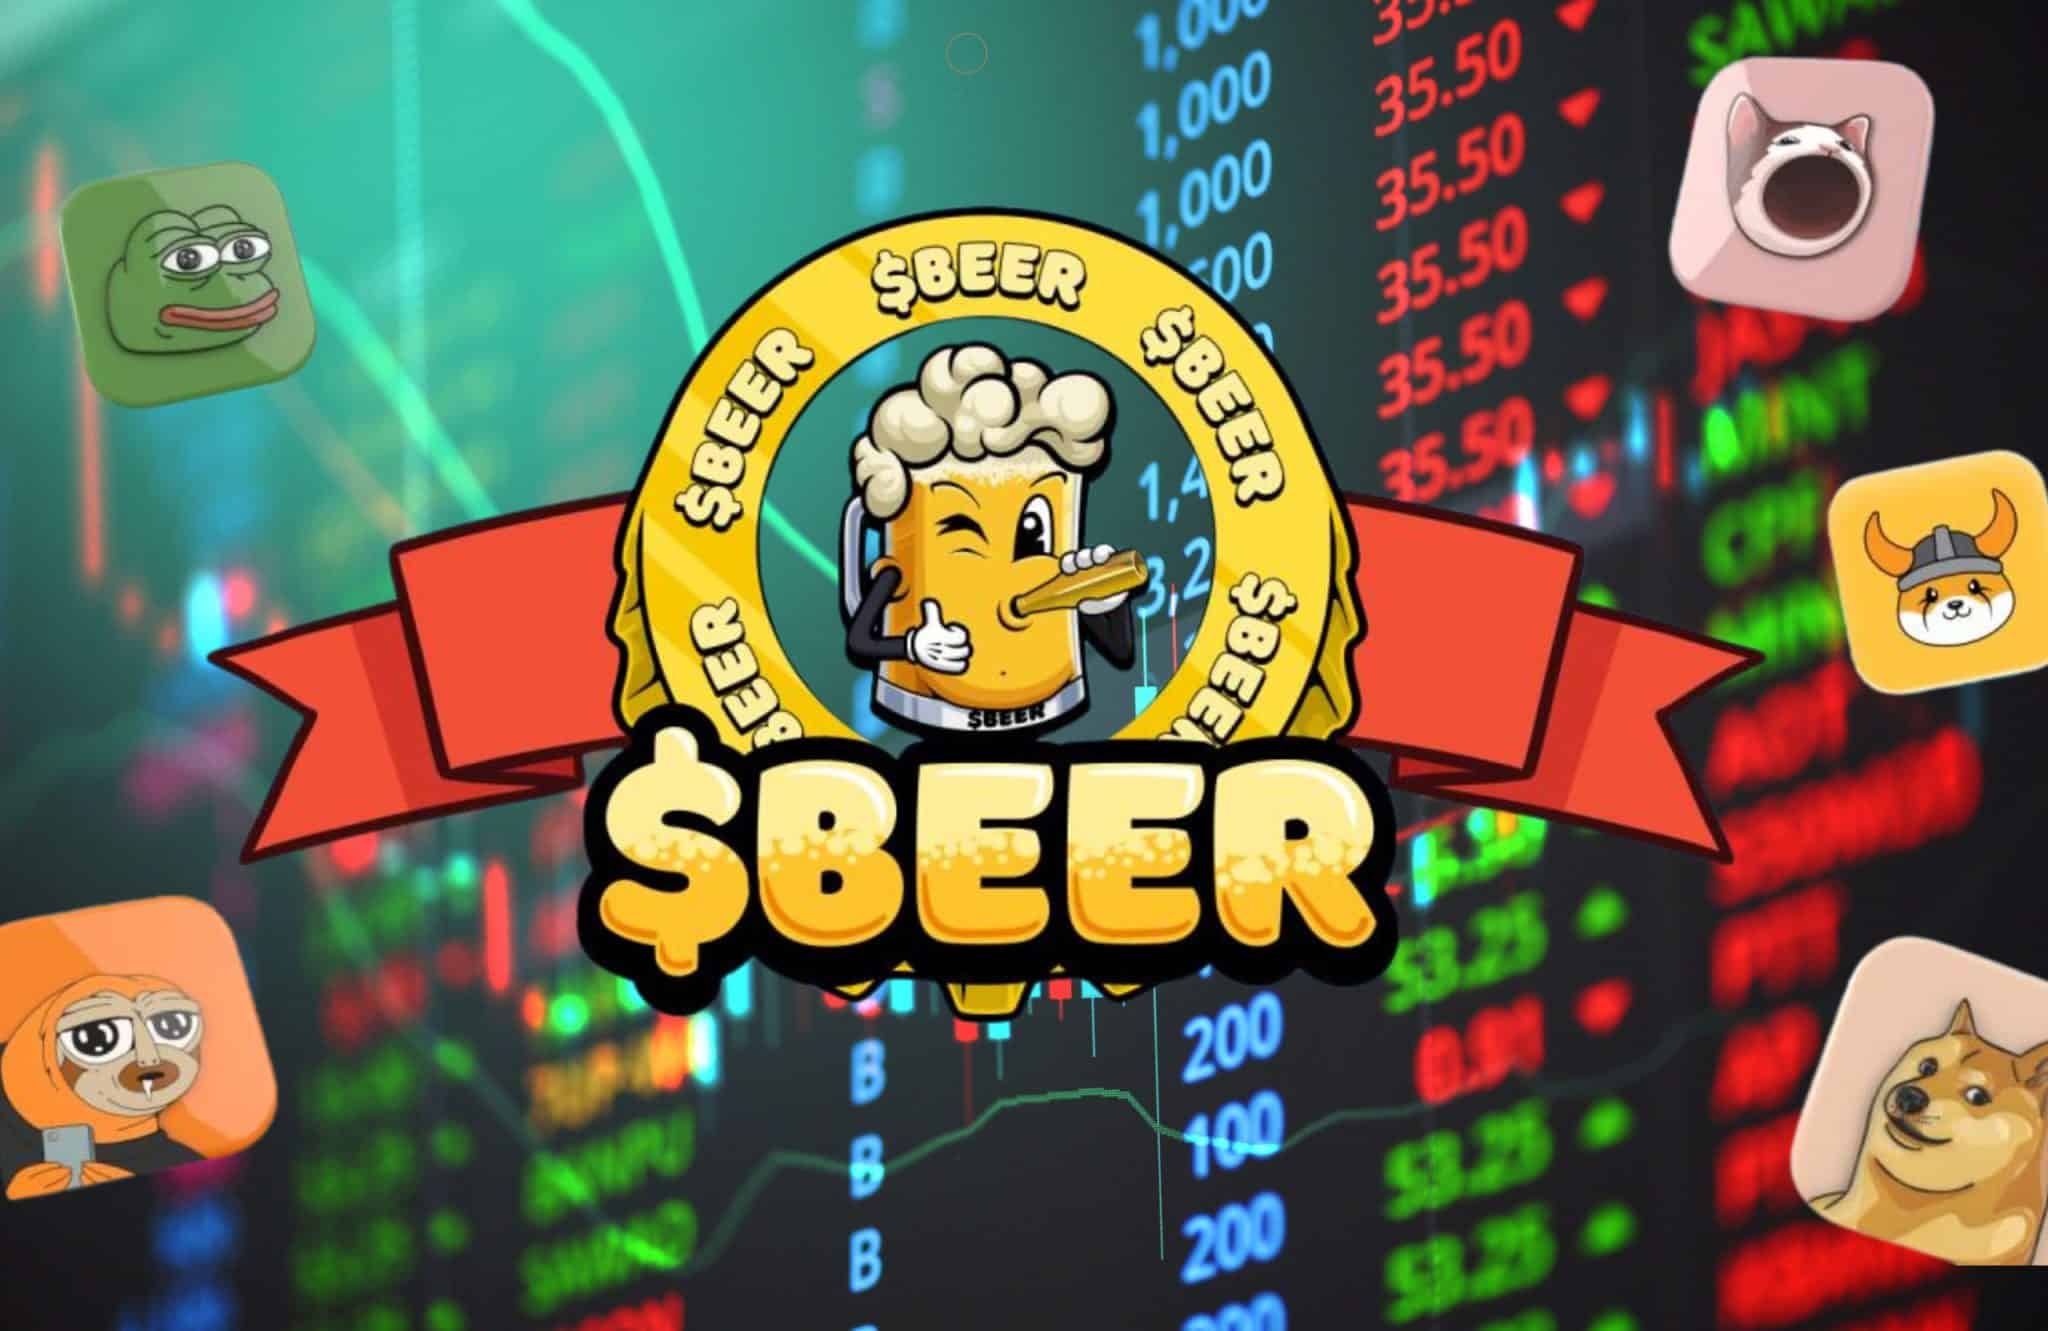 Discover frenzy behind Beercoin price ($BEER) and its remarkable rise in the crypto world. Will this Solana meme coin be the next big hit?